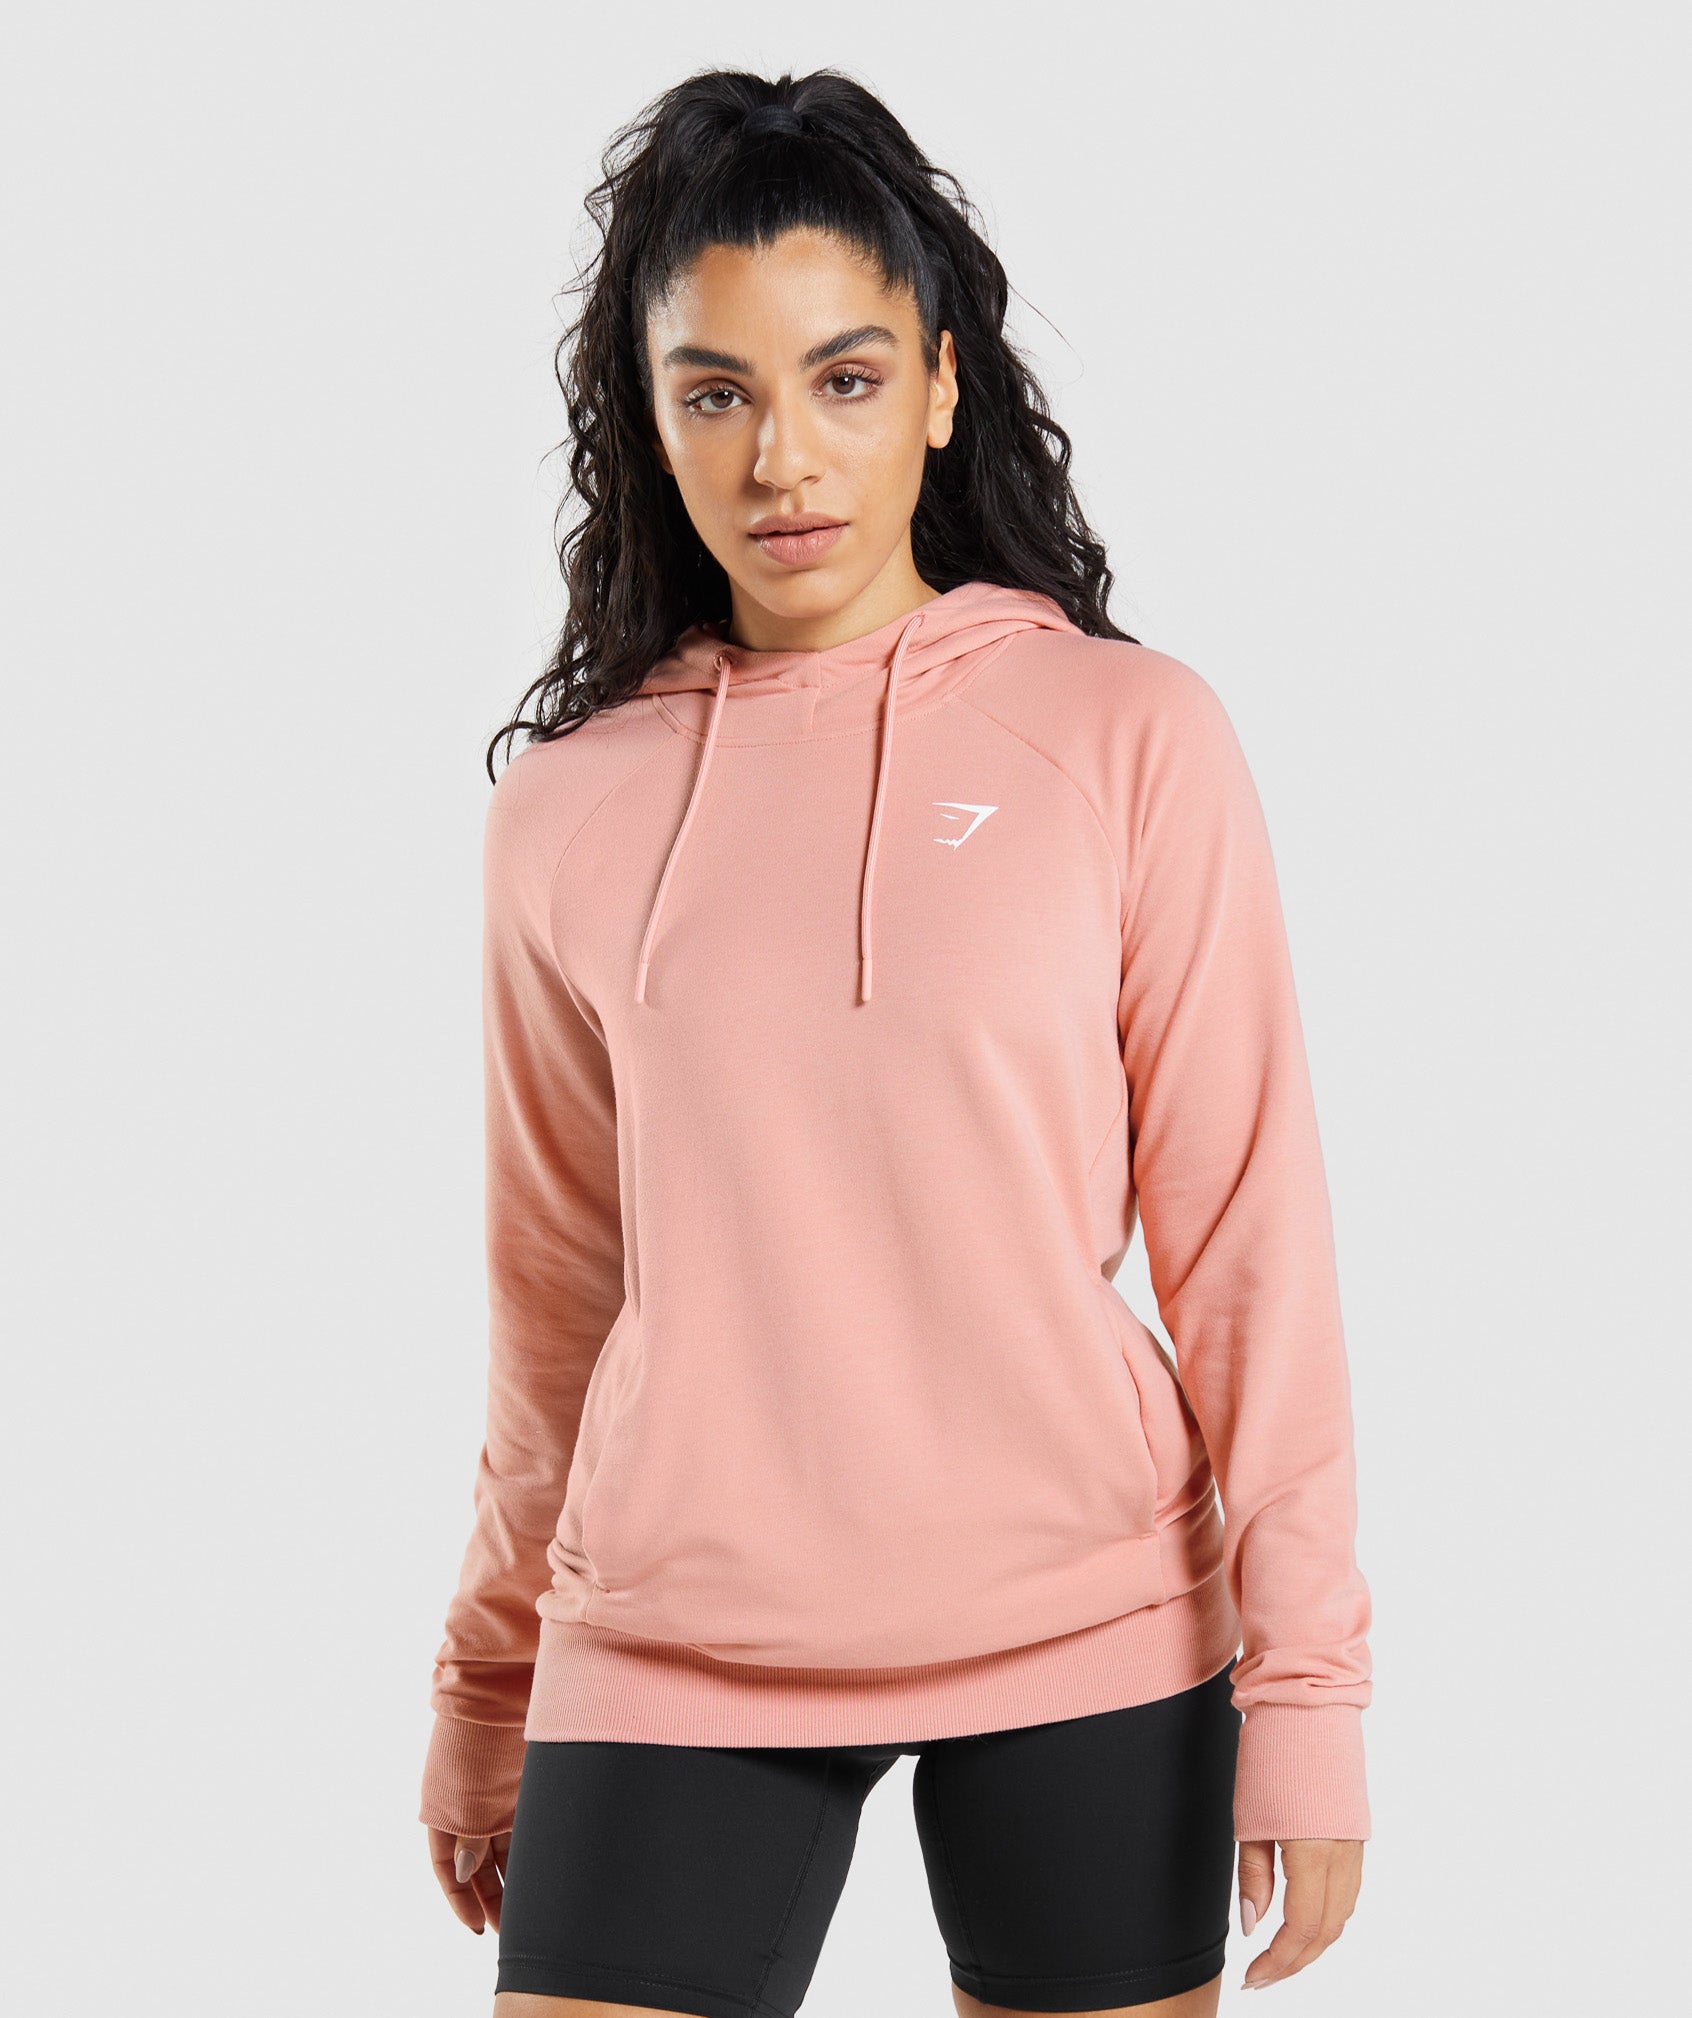 Training Hoodie in Paige Pink - view 1